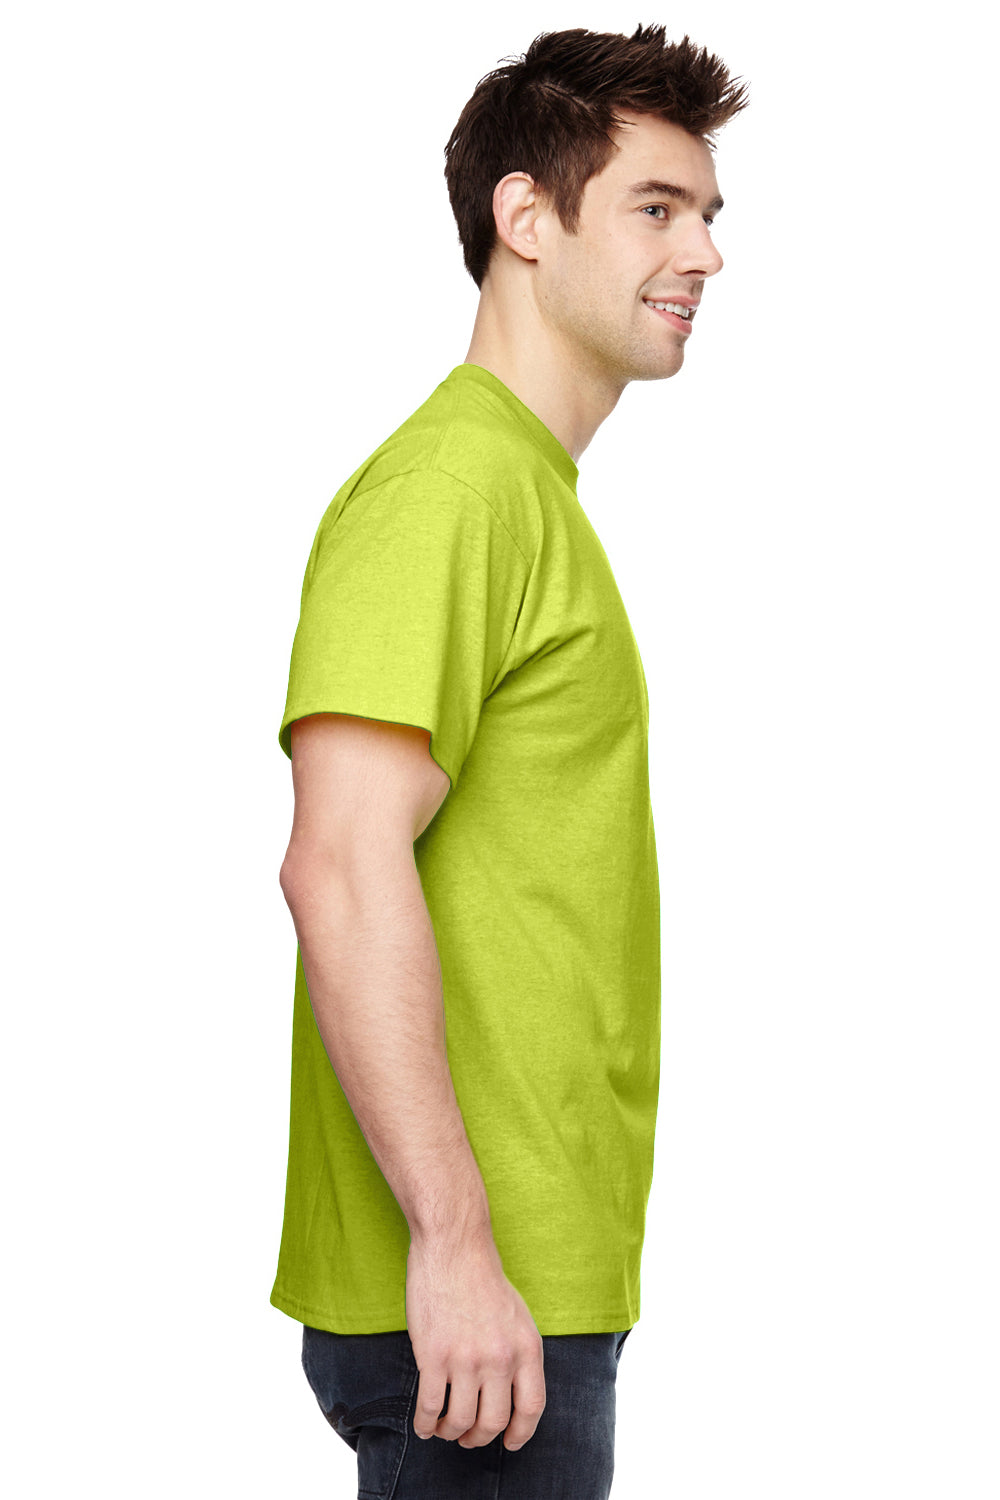 Fruit Of The Loom 3931 Mens HD Jersey Short Sleeve Crewneck T-Shirt Safety Green Side